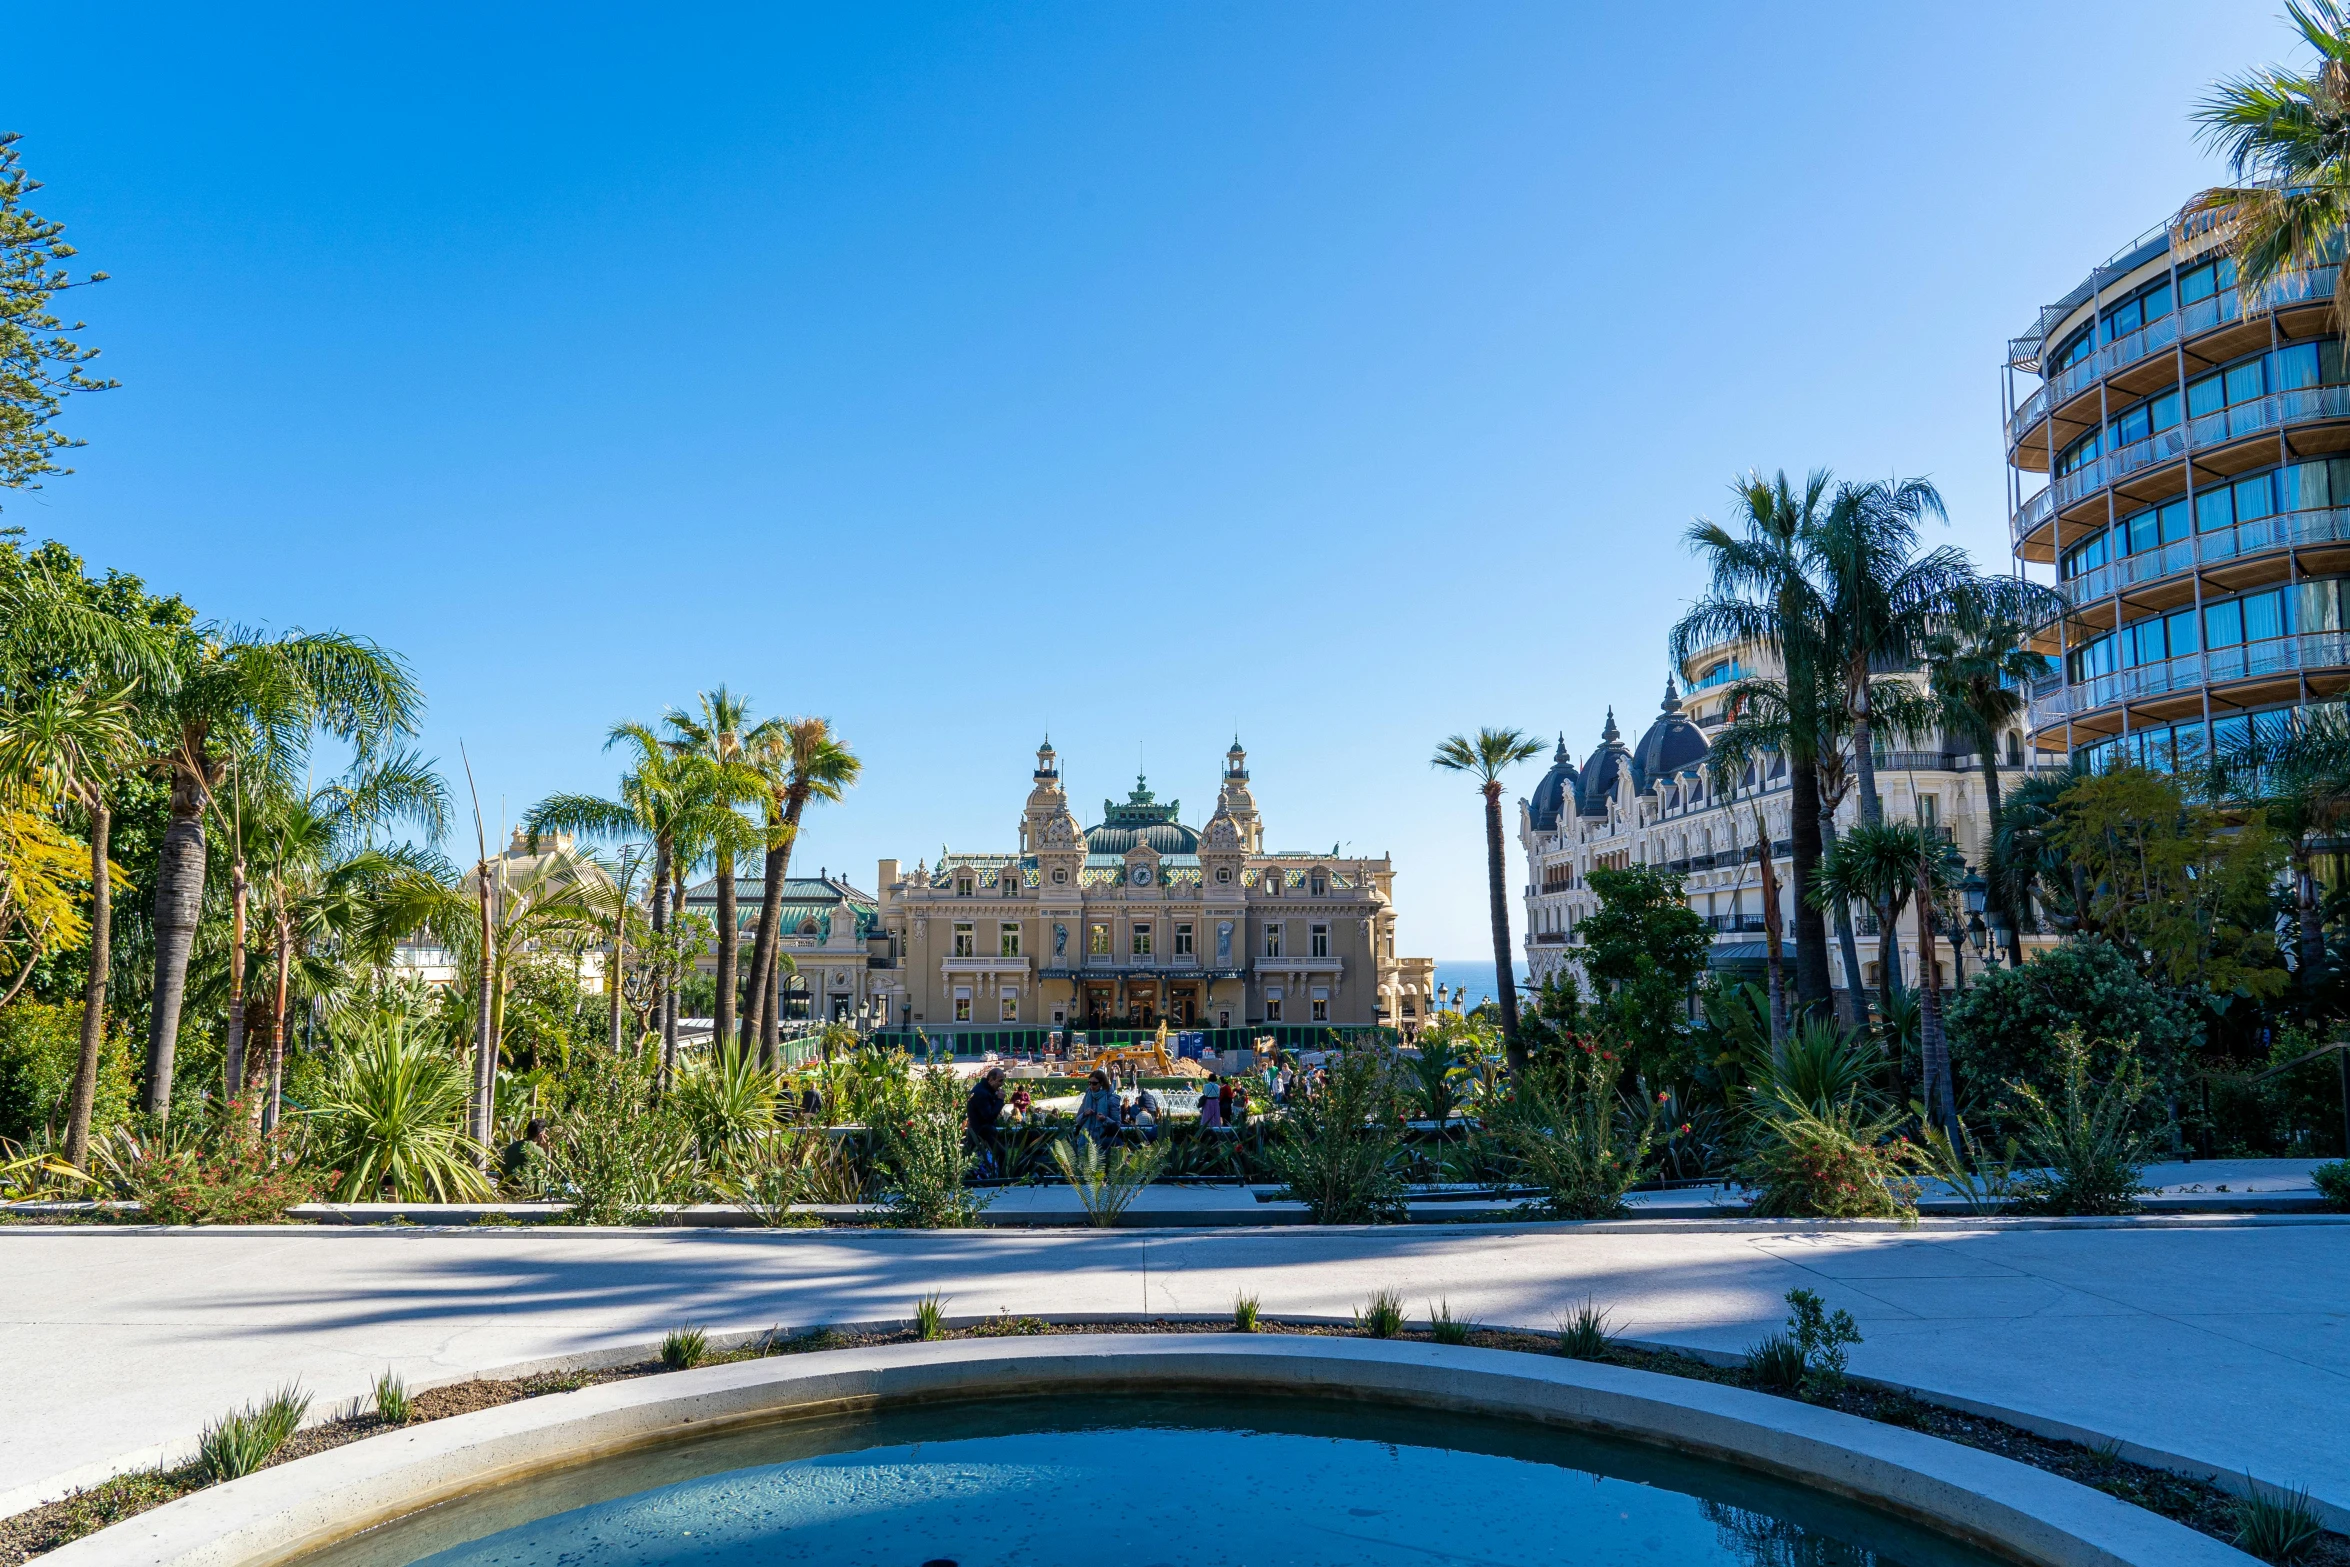 a pool surrounded by palm trees in front of a large building, pexels contest winner, art nouveau, monaco, buildings carved out of stone, a green, flowers around